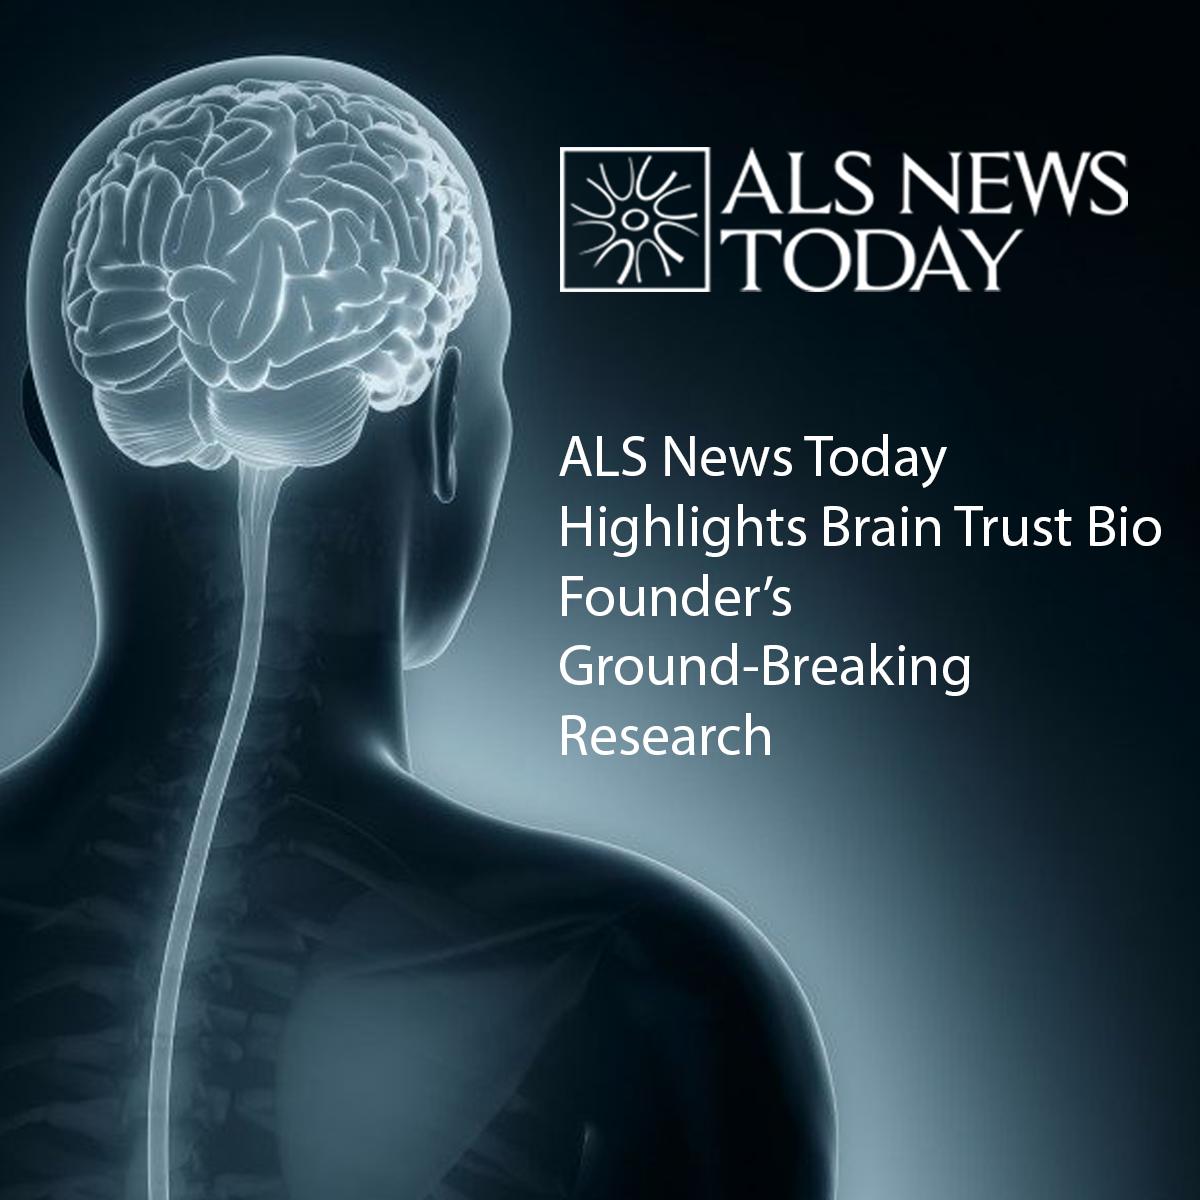 Brain Trust Bio founder’s ground-breaking research highlighted in ALS News Today: bit.ly/3254xpQ . . . #ALS #research #science #ALSNews #neurodegenerative